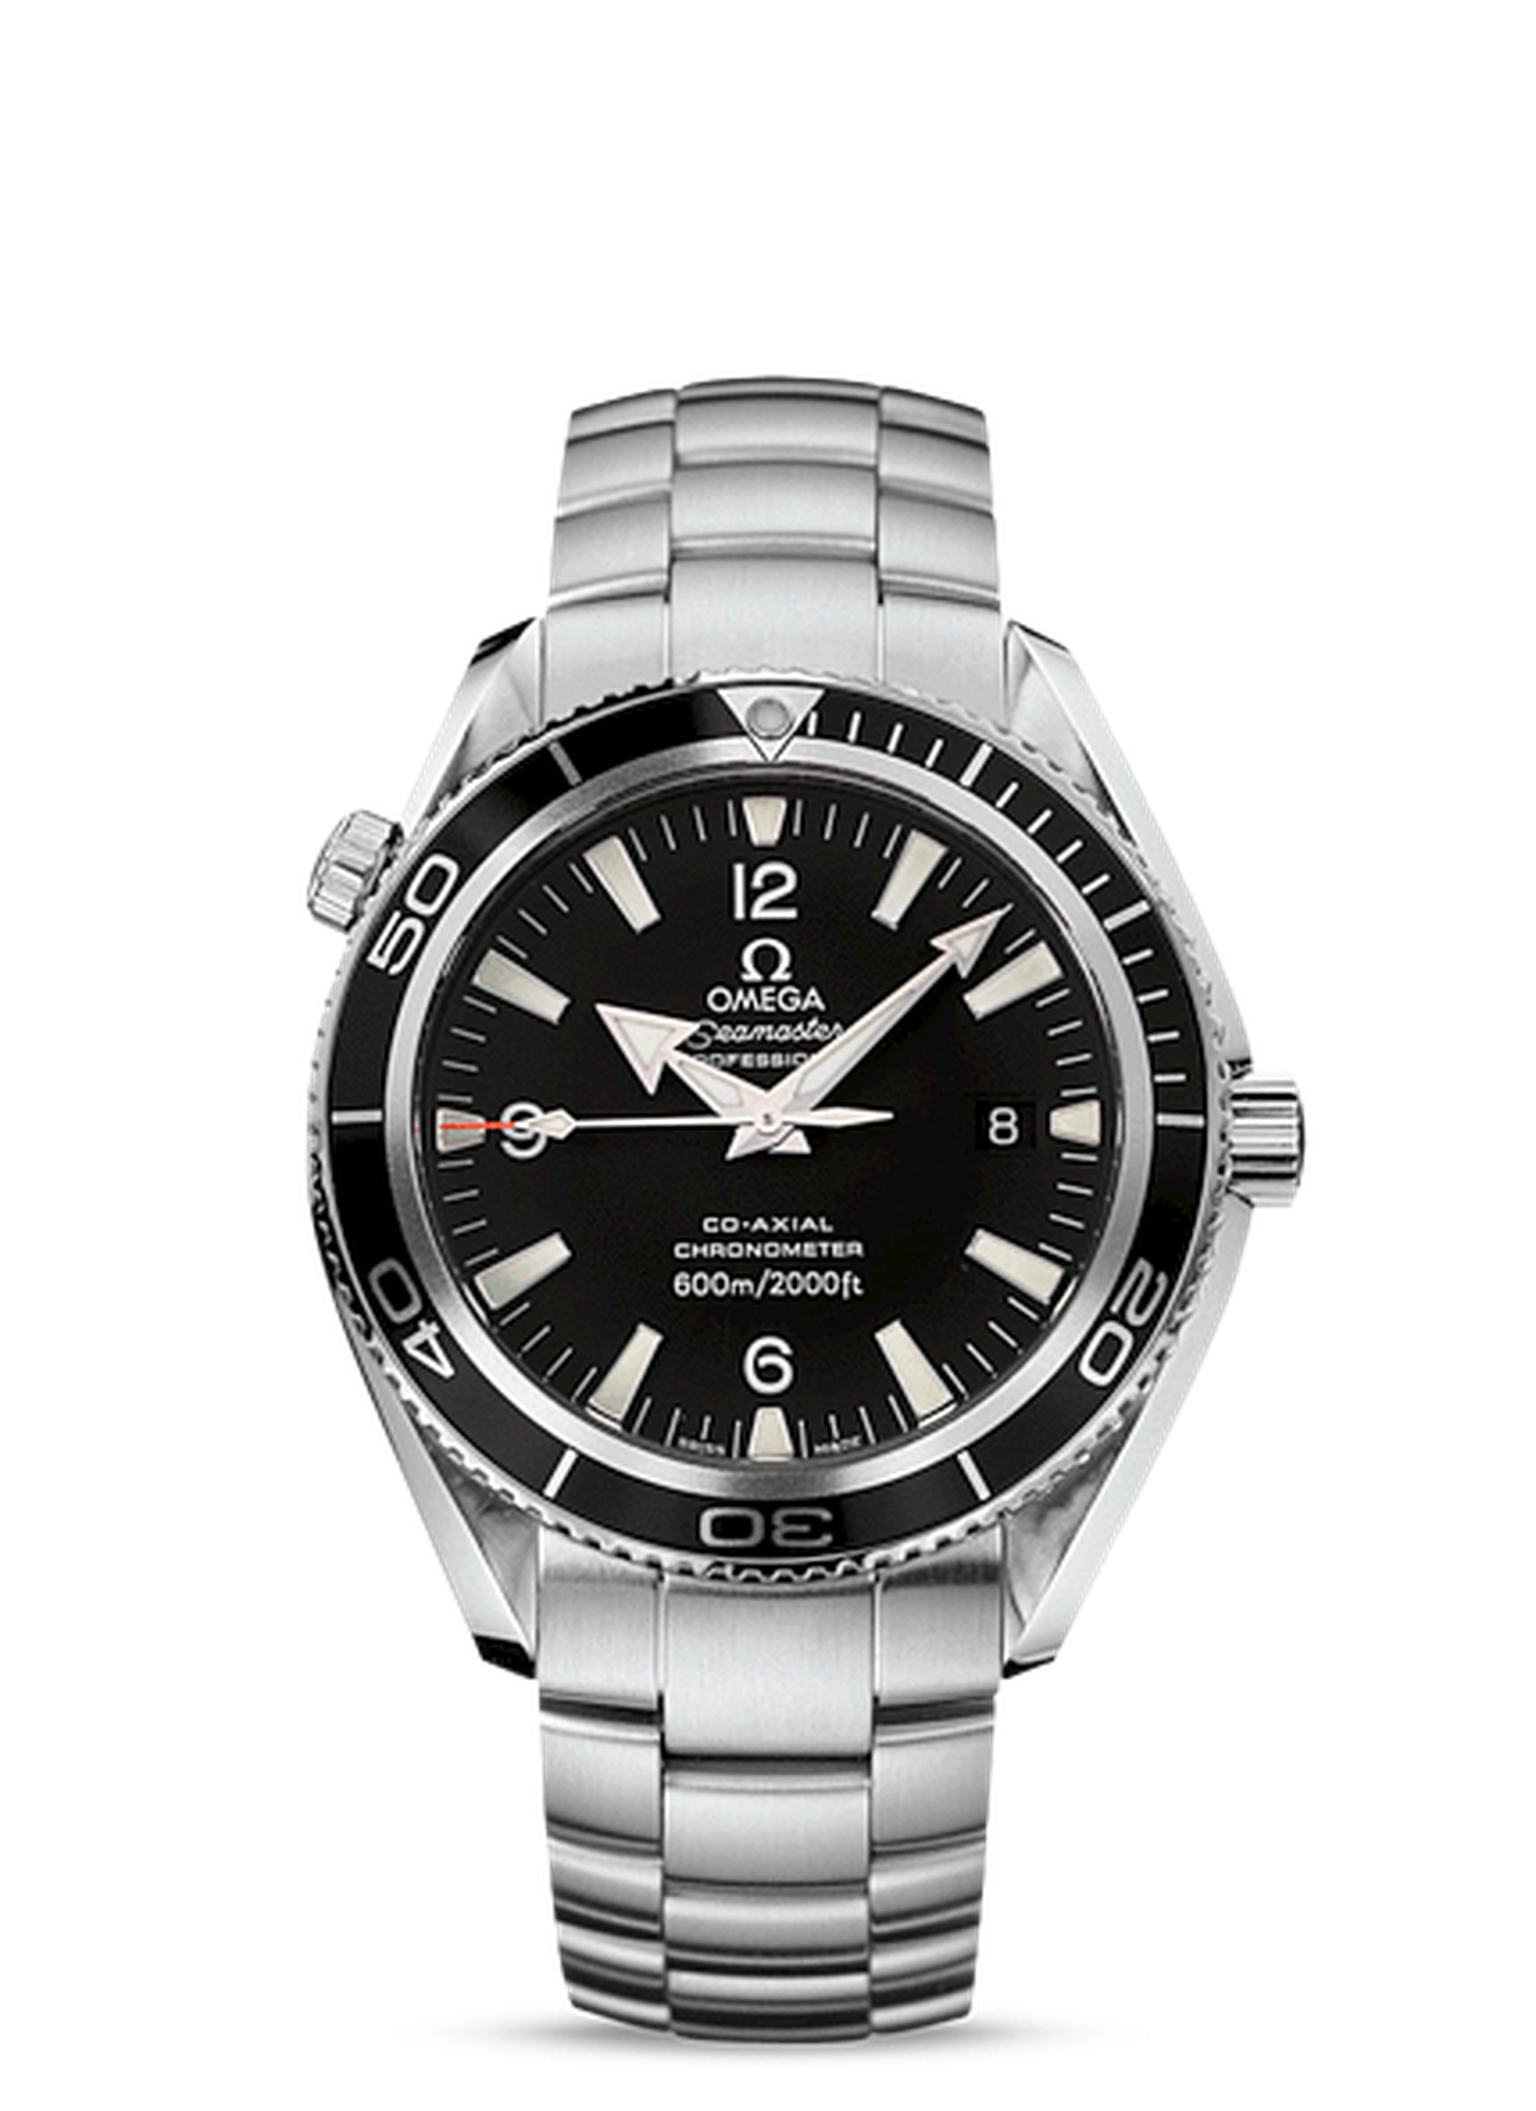 Like 007's watch in Quantum of Solace, the Omega Seamaster Planet Ocean 600m watch features a sturdy 45.5 mm Co-Axial chronometer movement.